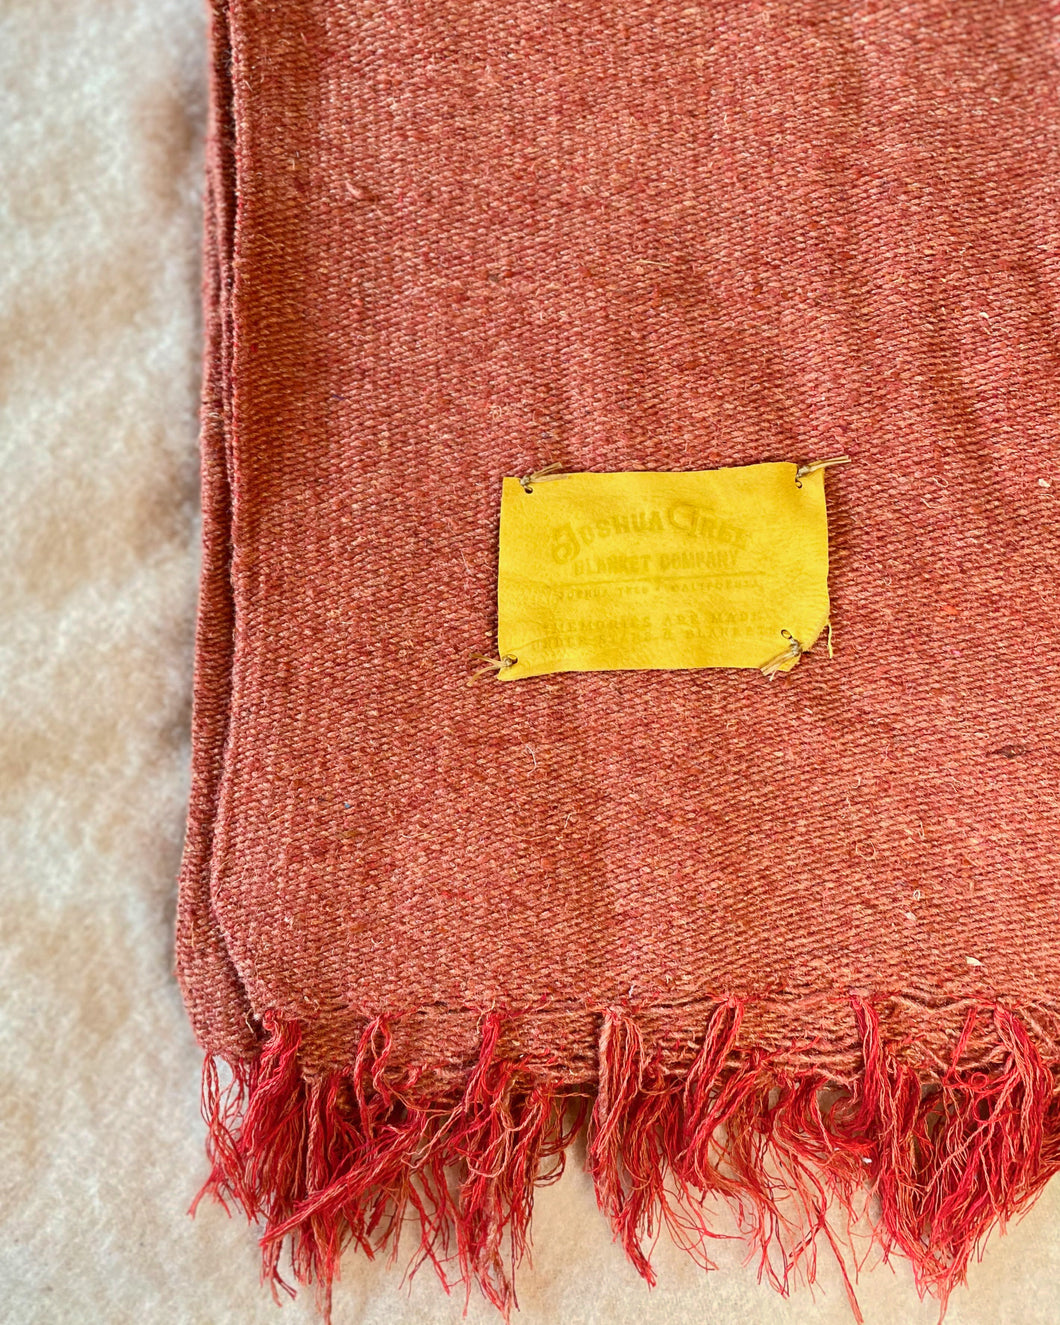 Handwoven Mexican blanket - Solid